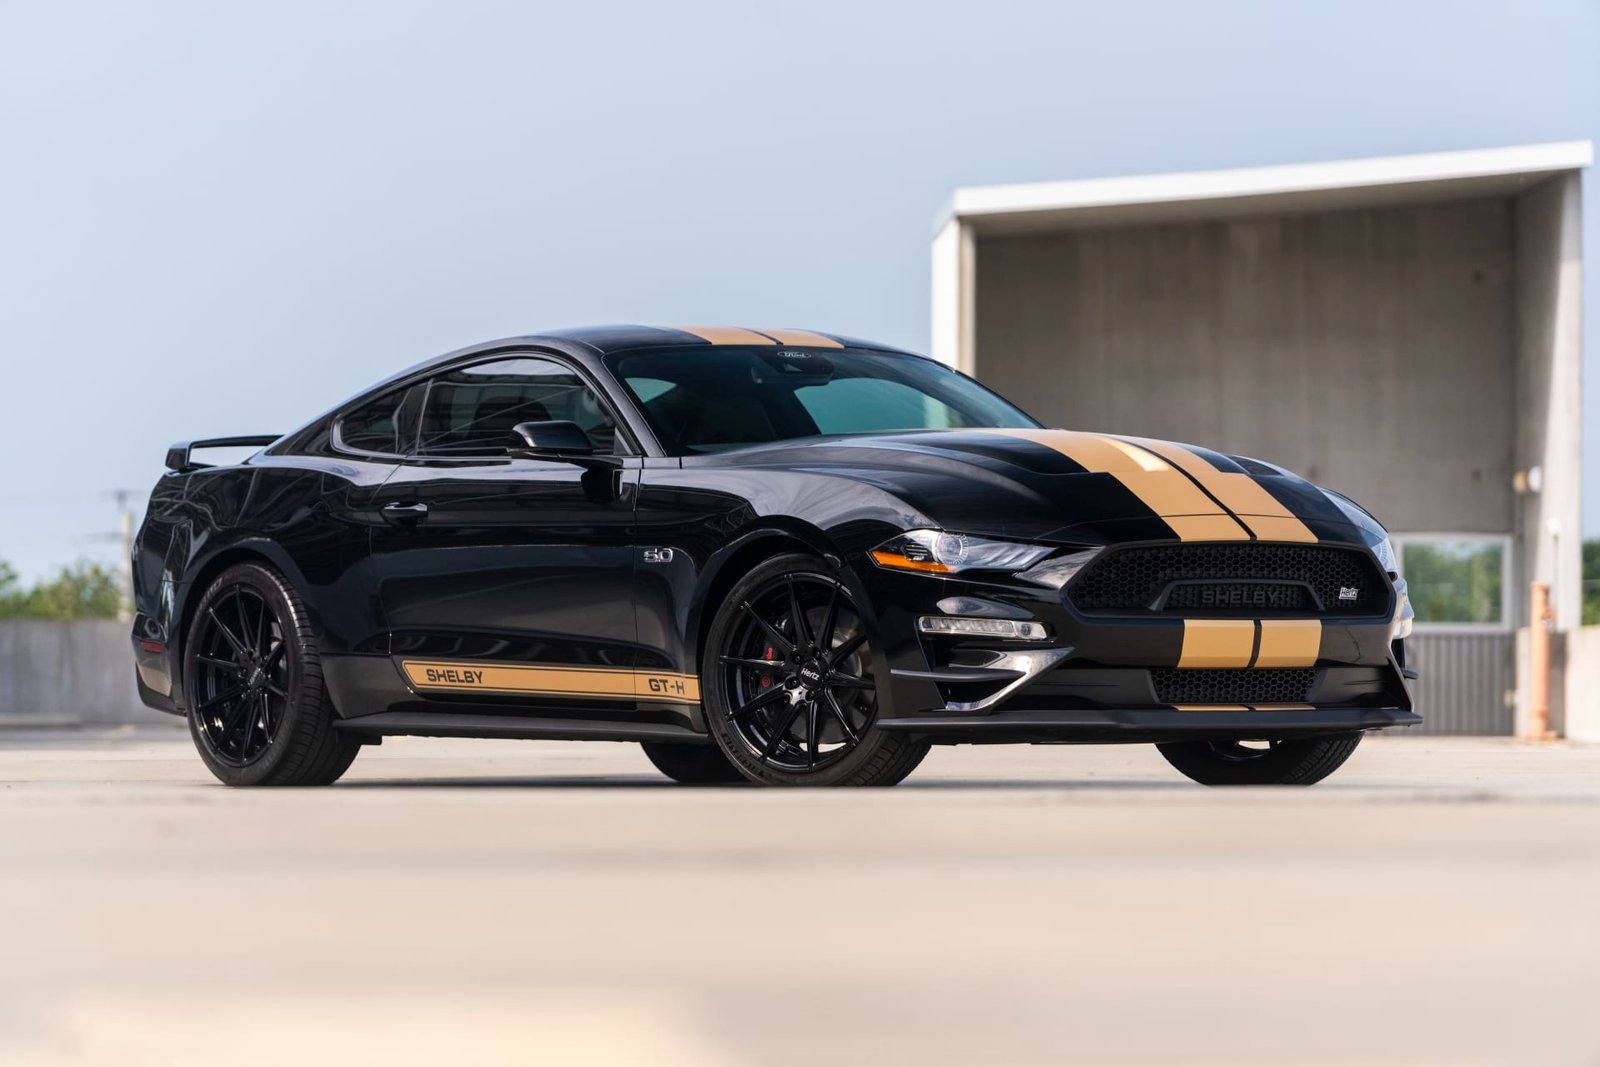 2022 Ford Shelby GT-H Prototype Coupe (3)